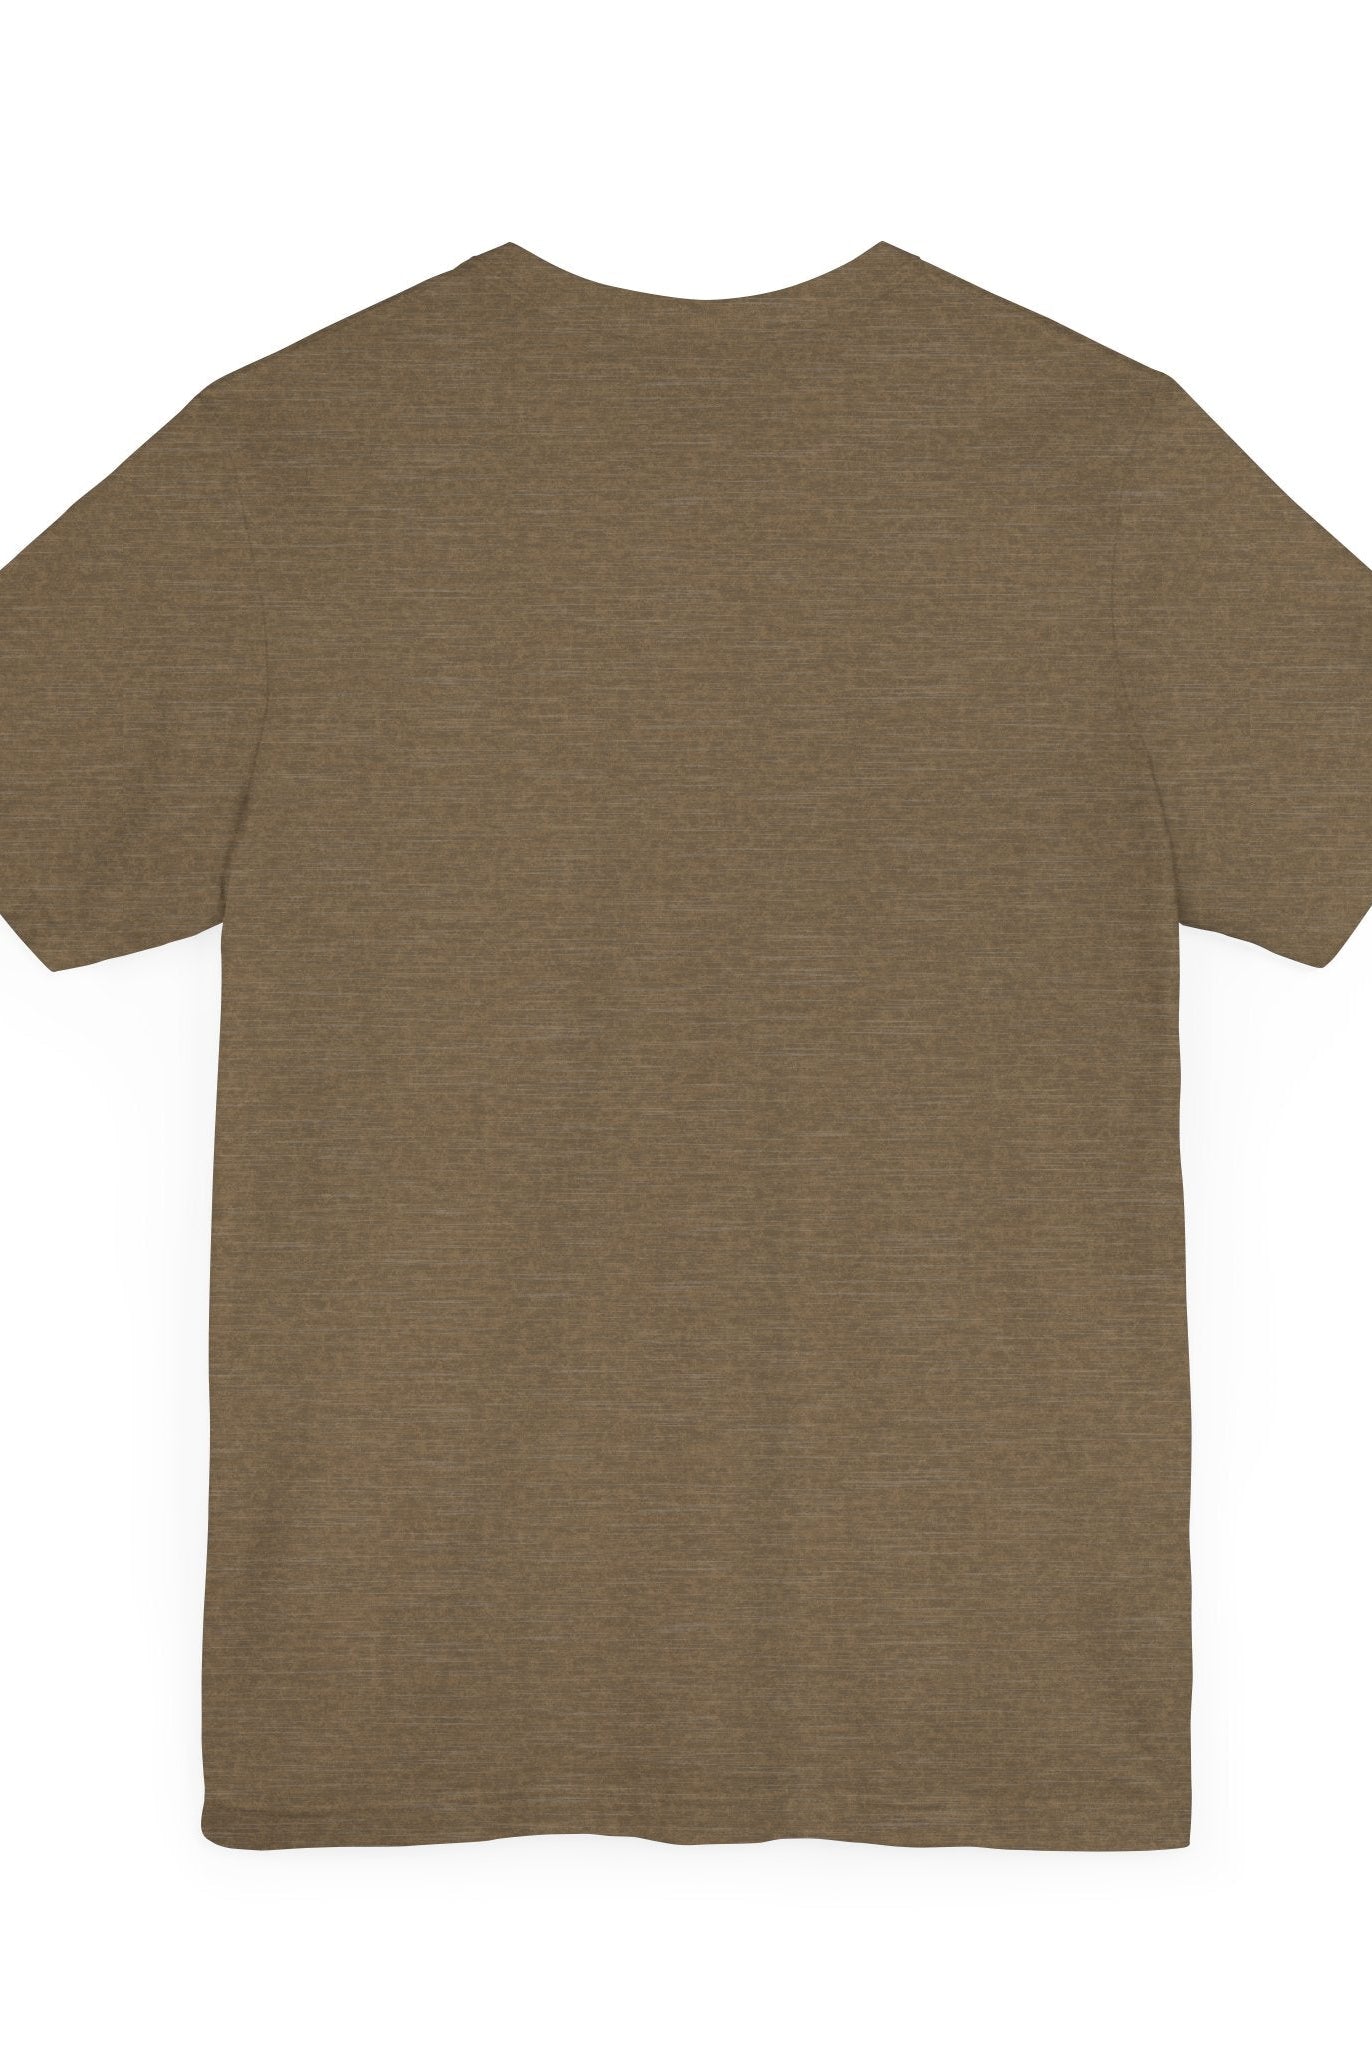 Direct-to-garment printed brown t shirt from Be Amazing - Bella & Canvas - Soulshinecreators - Unisex